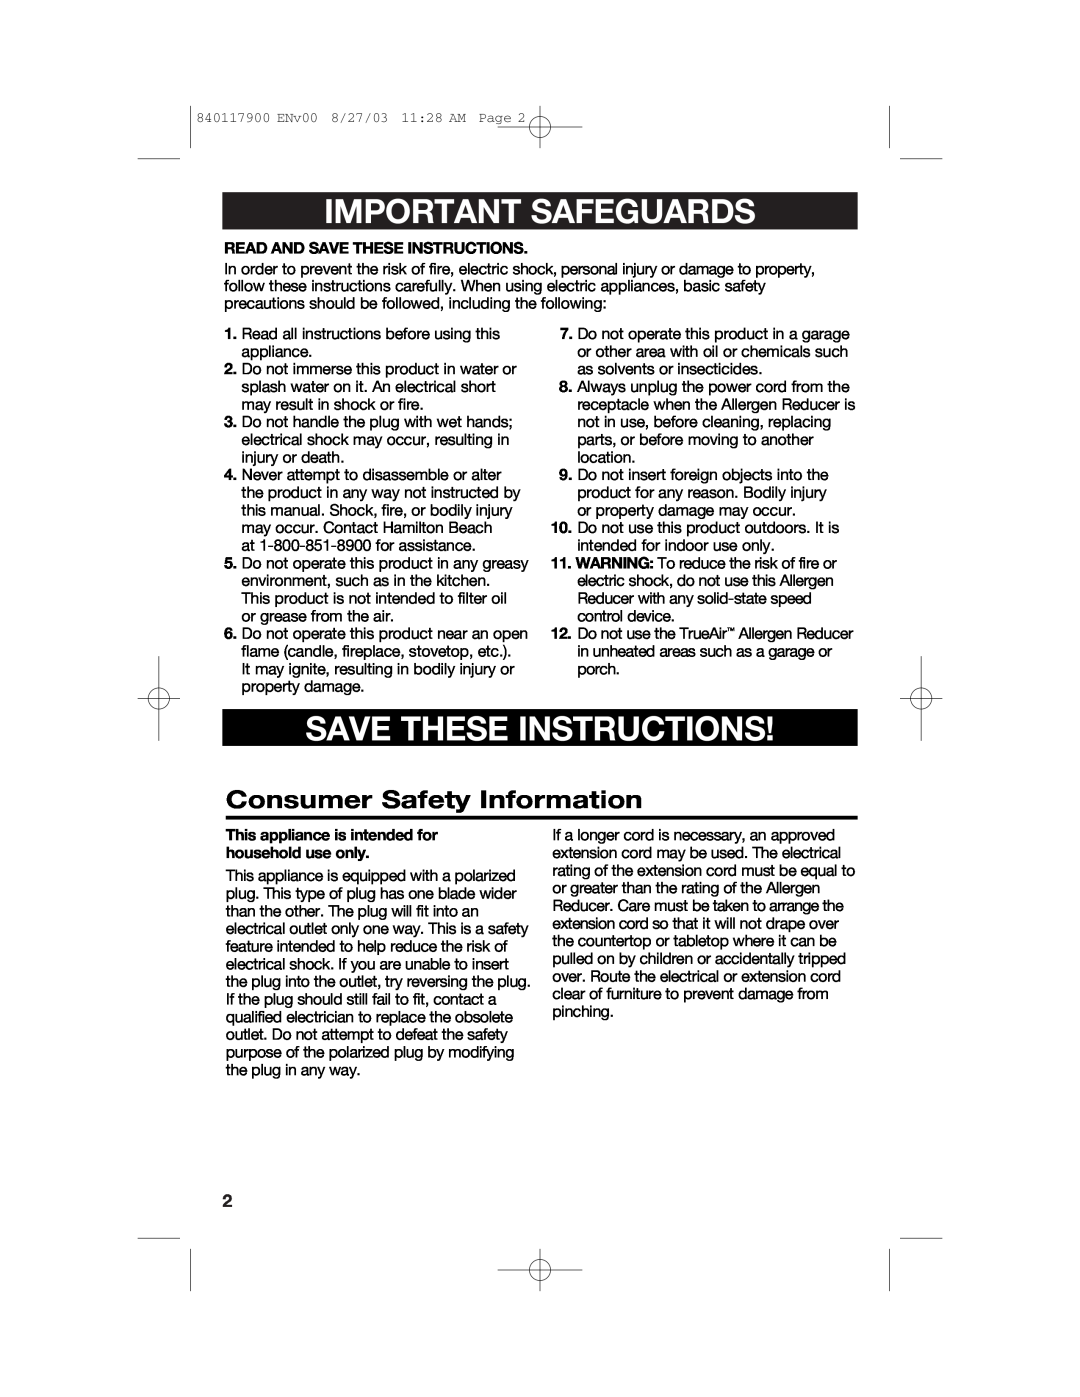 Hamilton Beach 840117900 manual Important Safeguards, Save These Instructions, Consumer Safety Information 